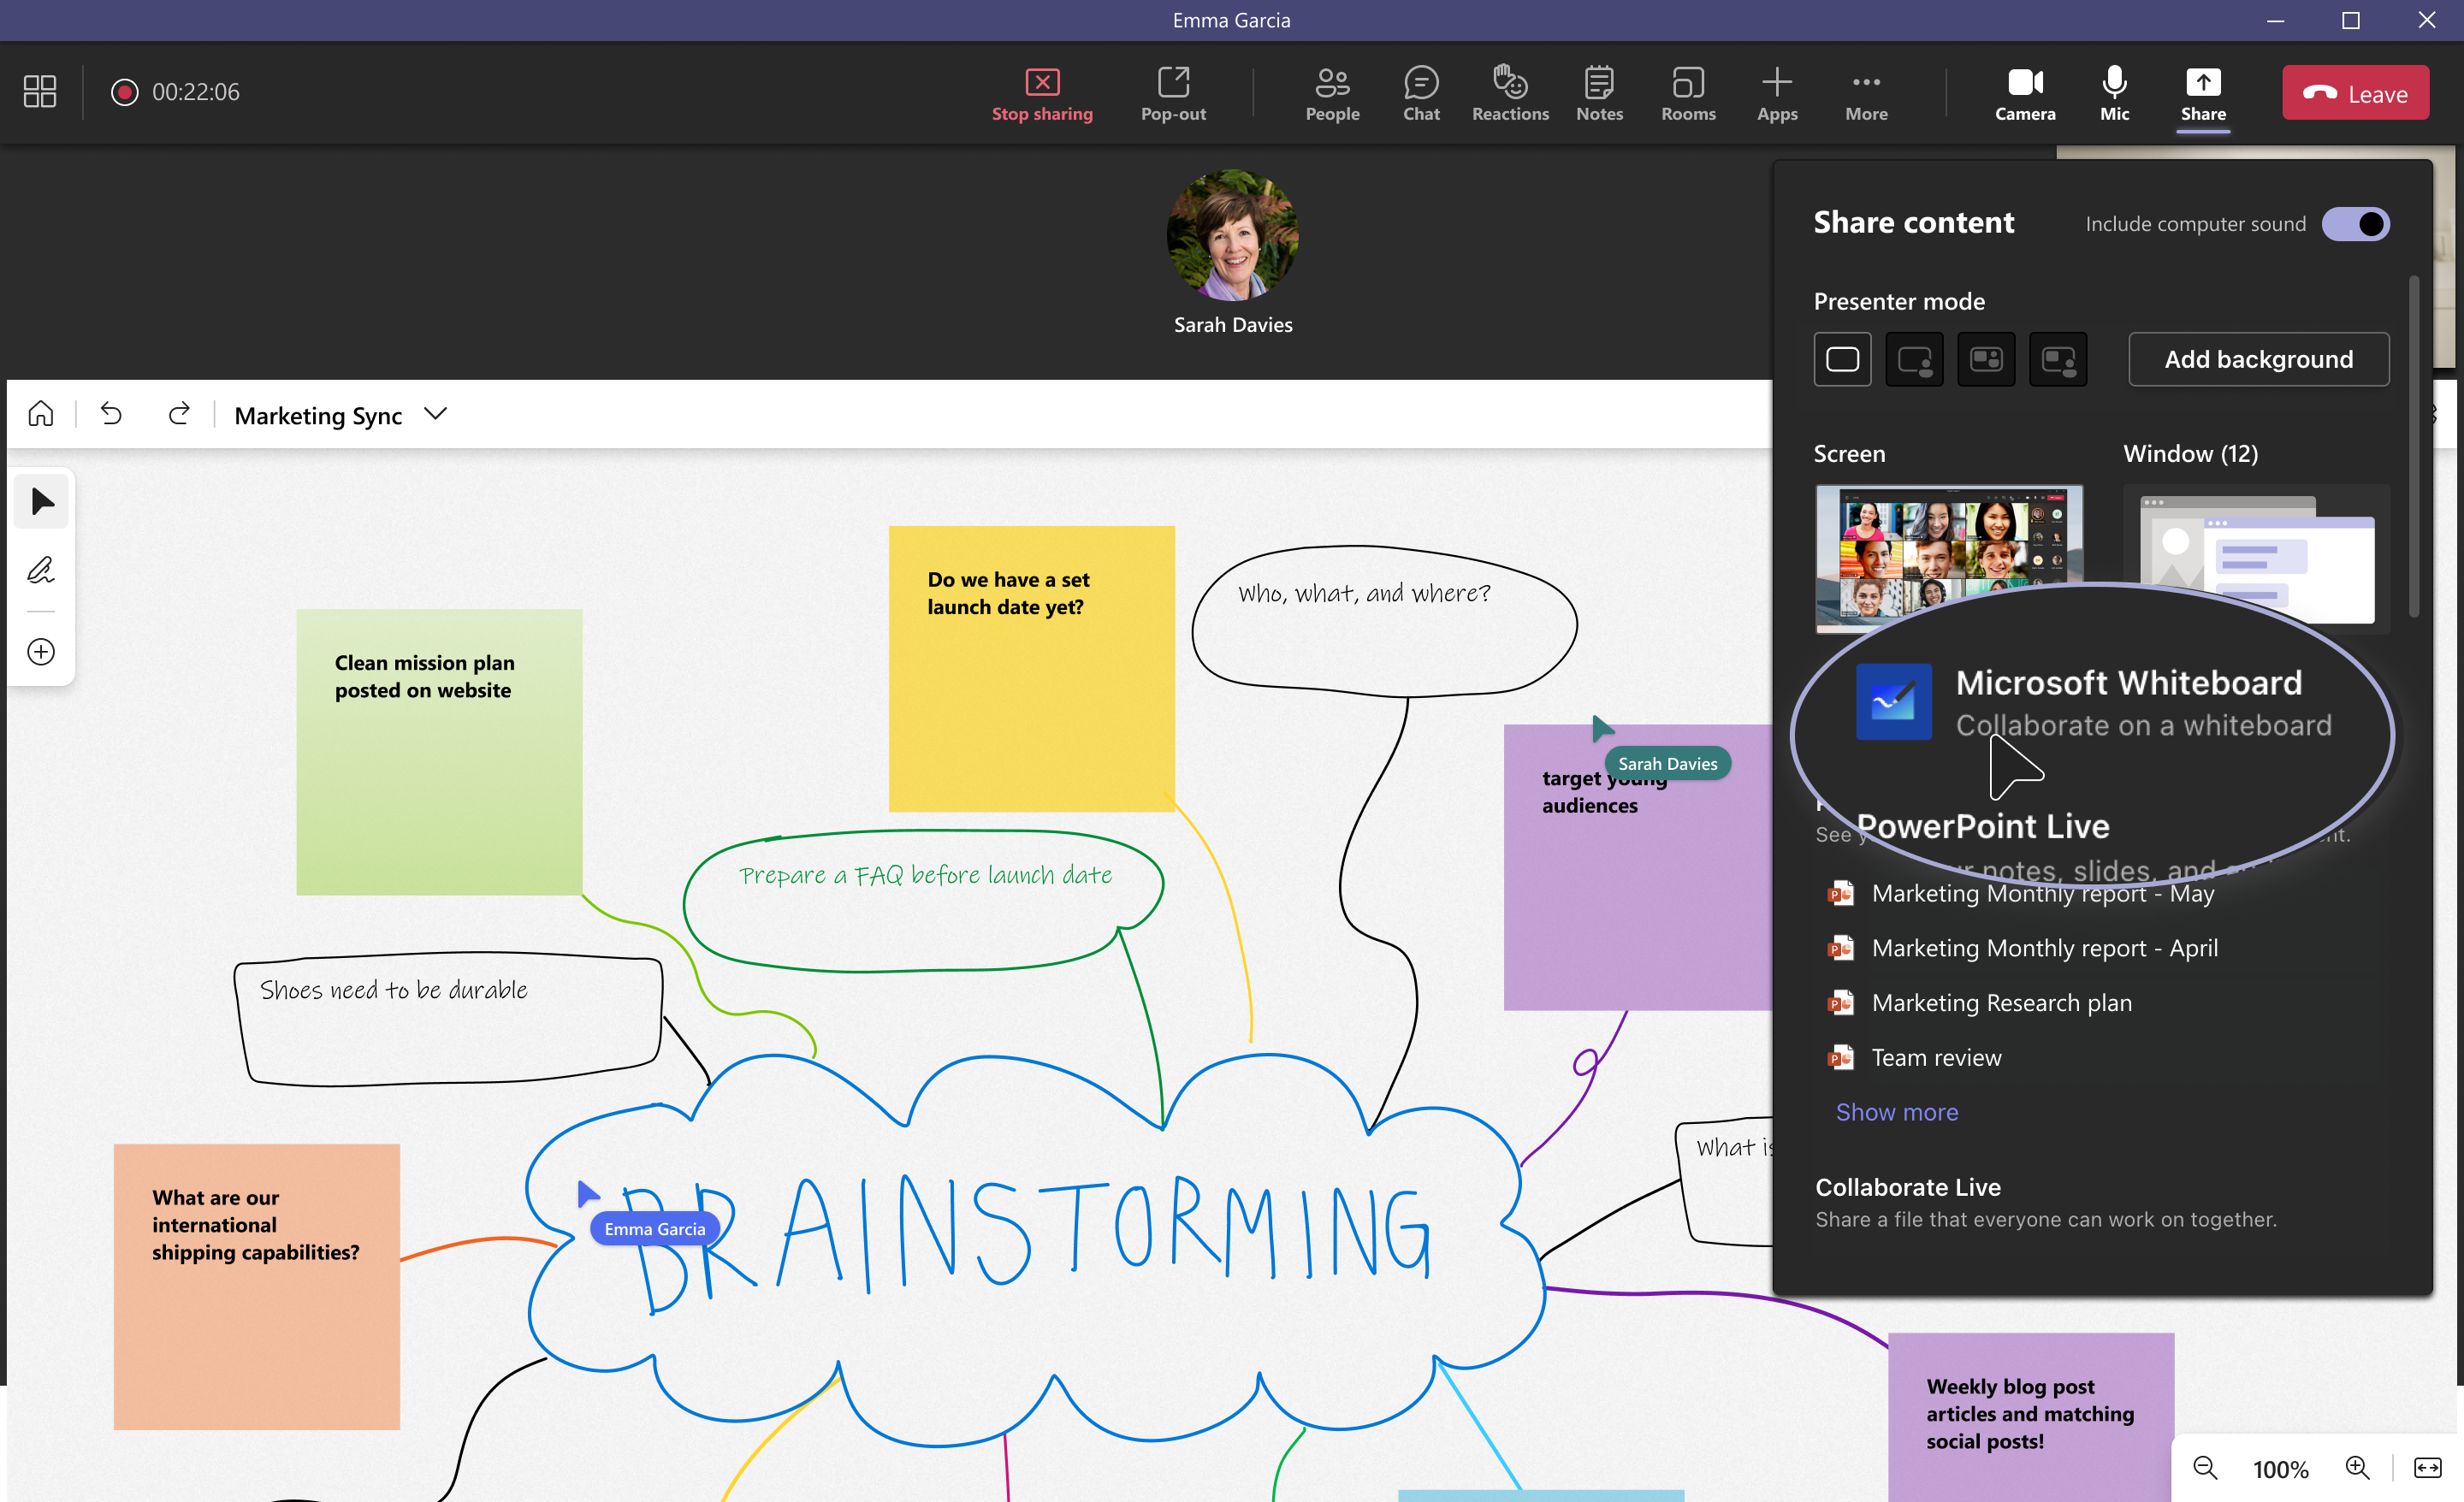 An image demonstrating how to start collaborating in Microsoft Whiteboard in a Teams meeting.